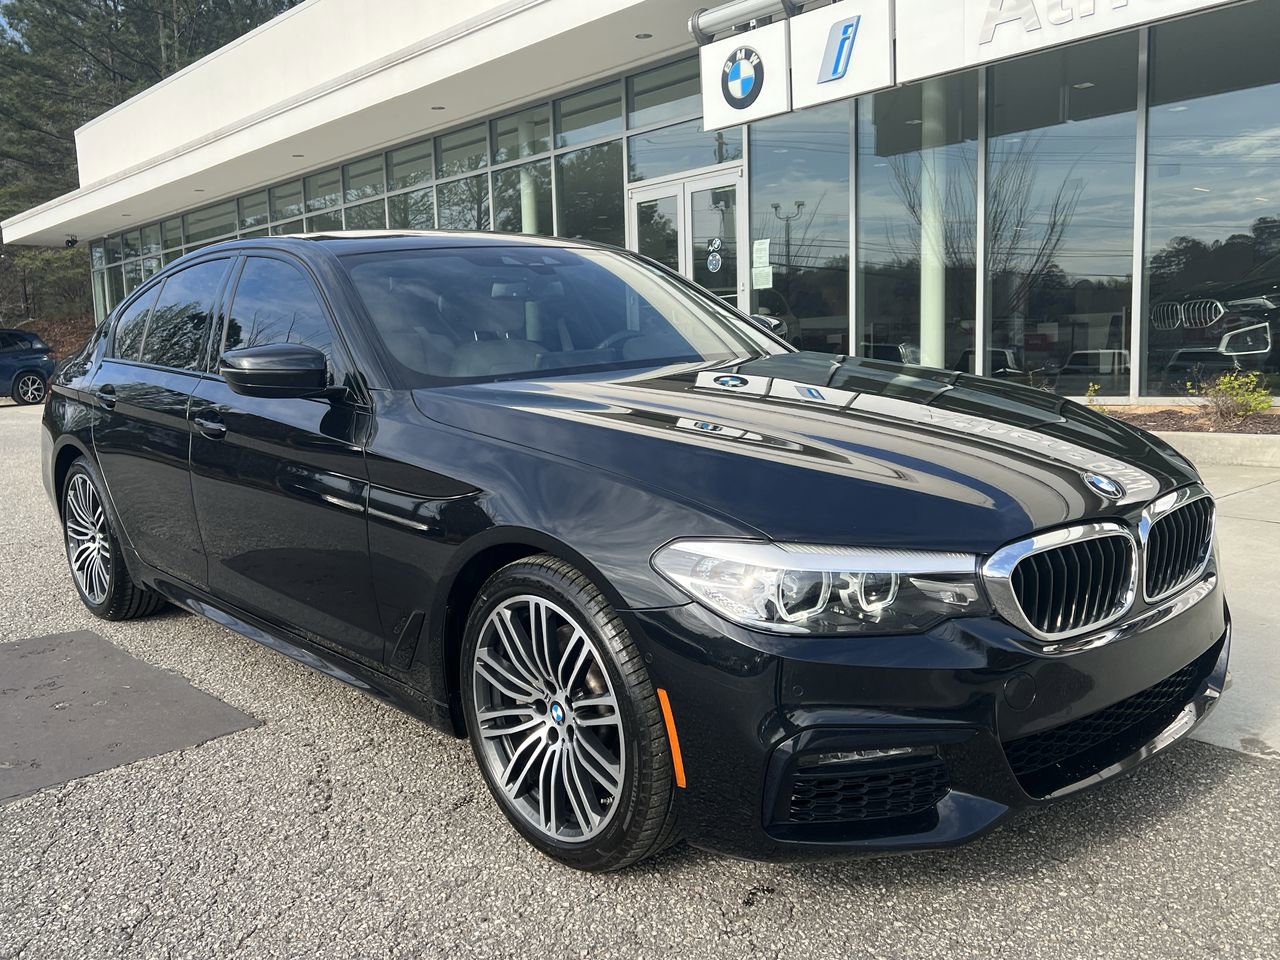 Pre-Owned 2020 BMW 5 Series 530i xDrive 4dr Car in Athens #LWW66367 |  Athens BMW